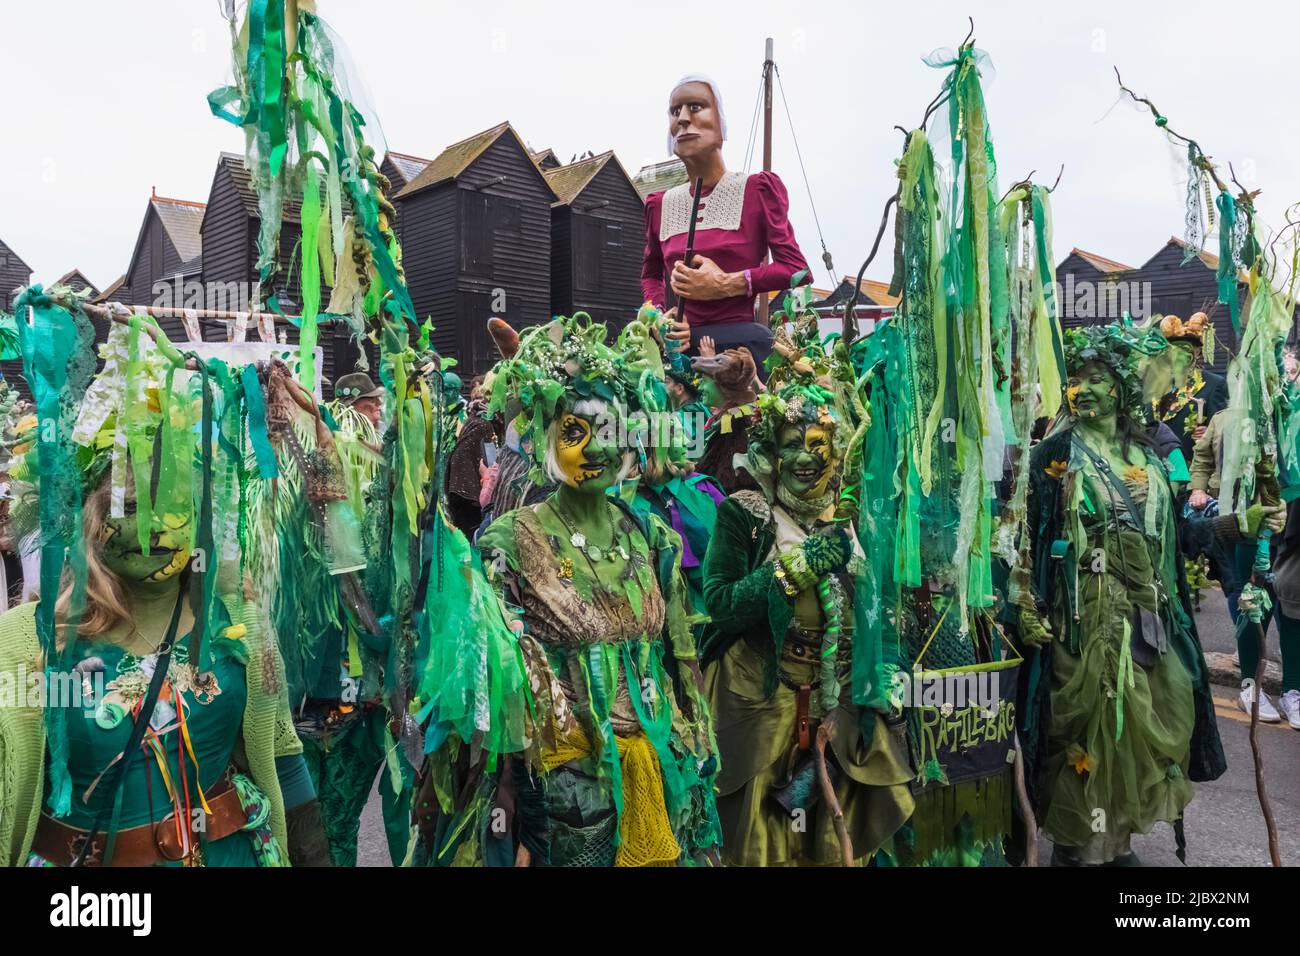 England, East Sussex, Hastings, The Annual Jack in the Green Festival, Participant at the Jack in the Green Parade Stock Photo